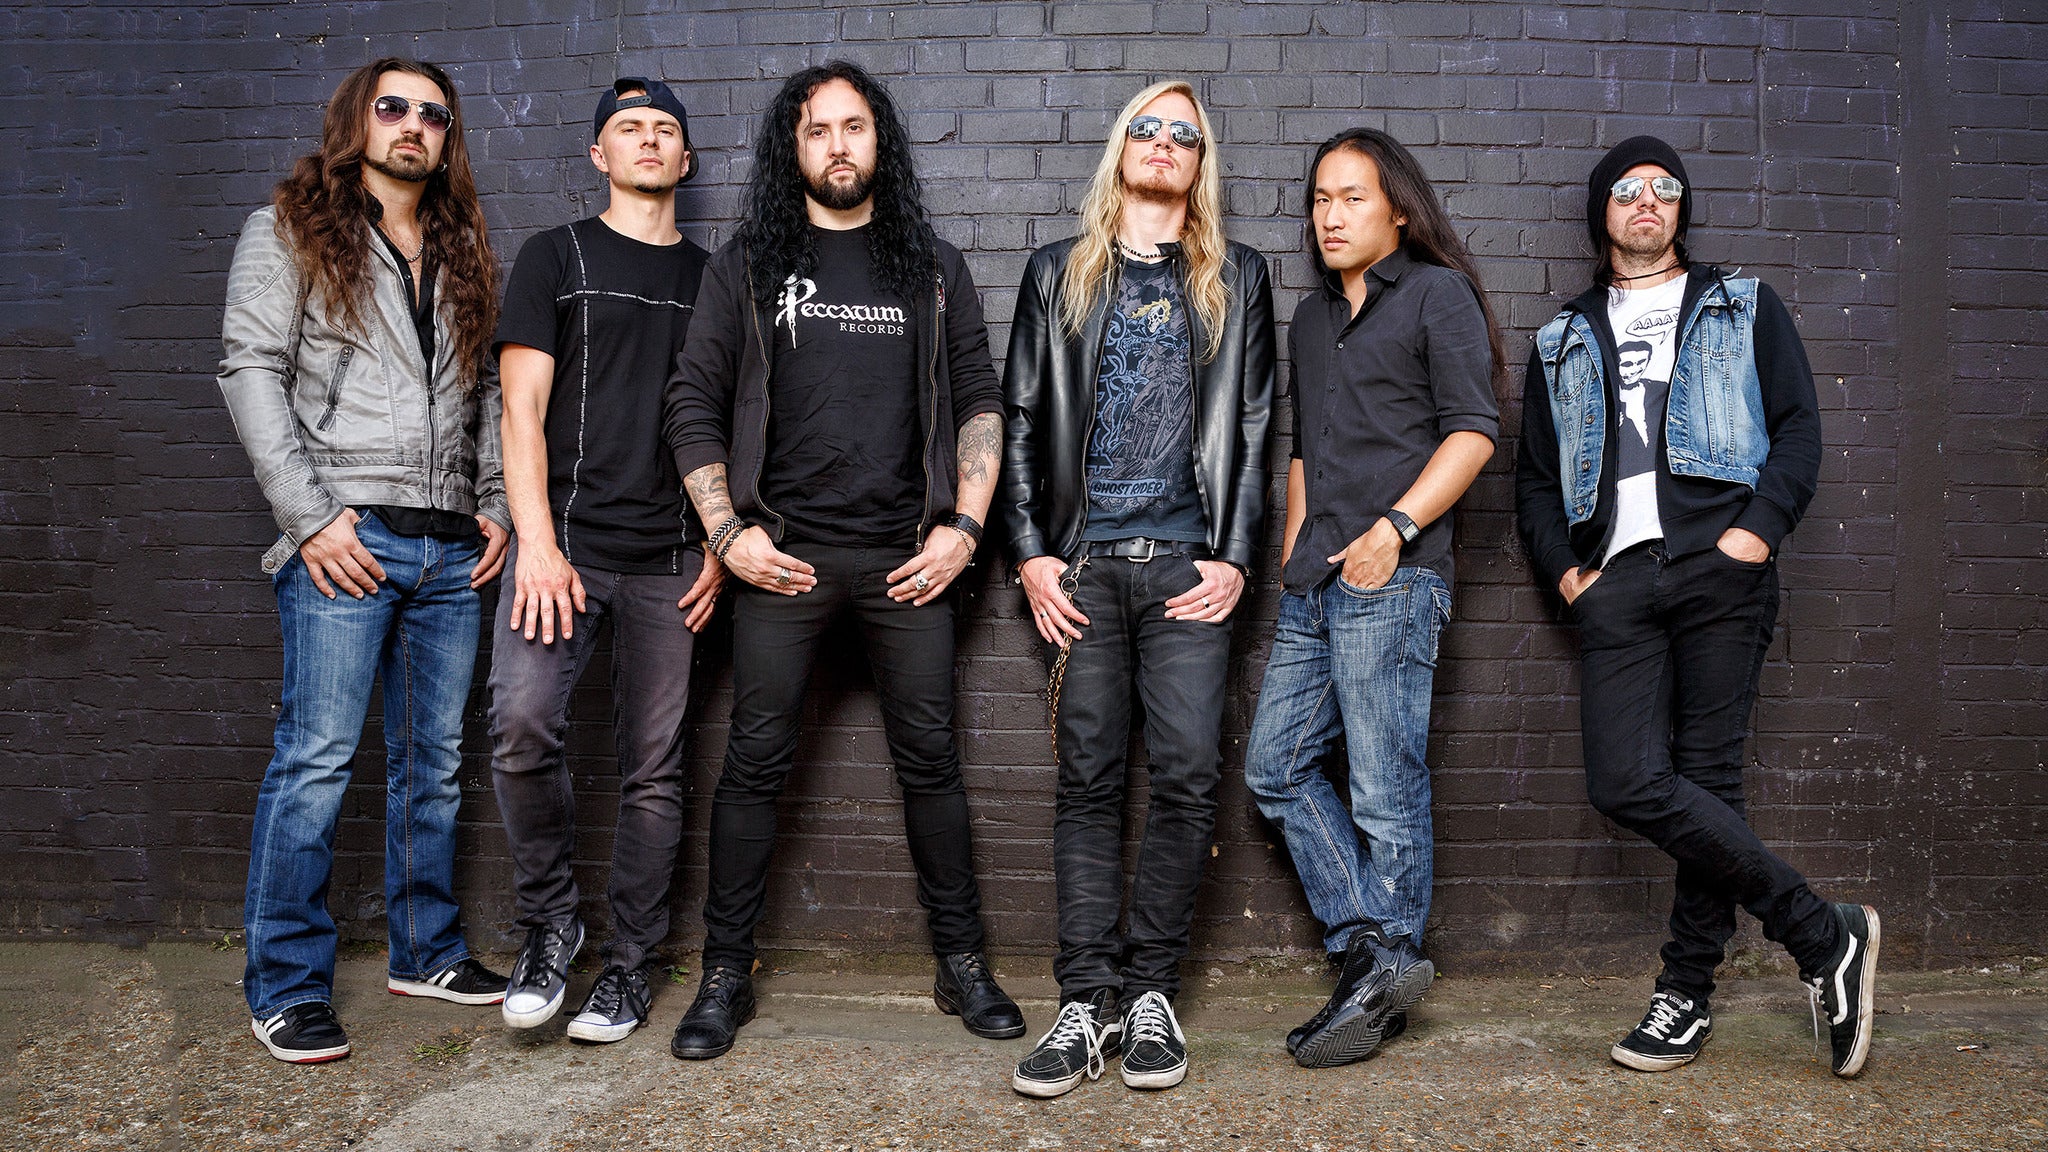 DRAGONFORCE Release Music Video For ‘Troopers Of The Stars’, Announce Fall 2022 European Tour